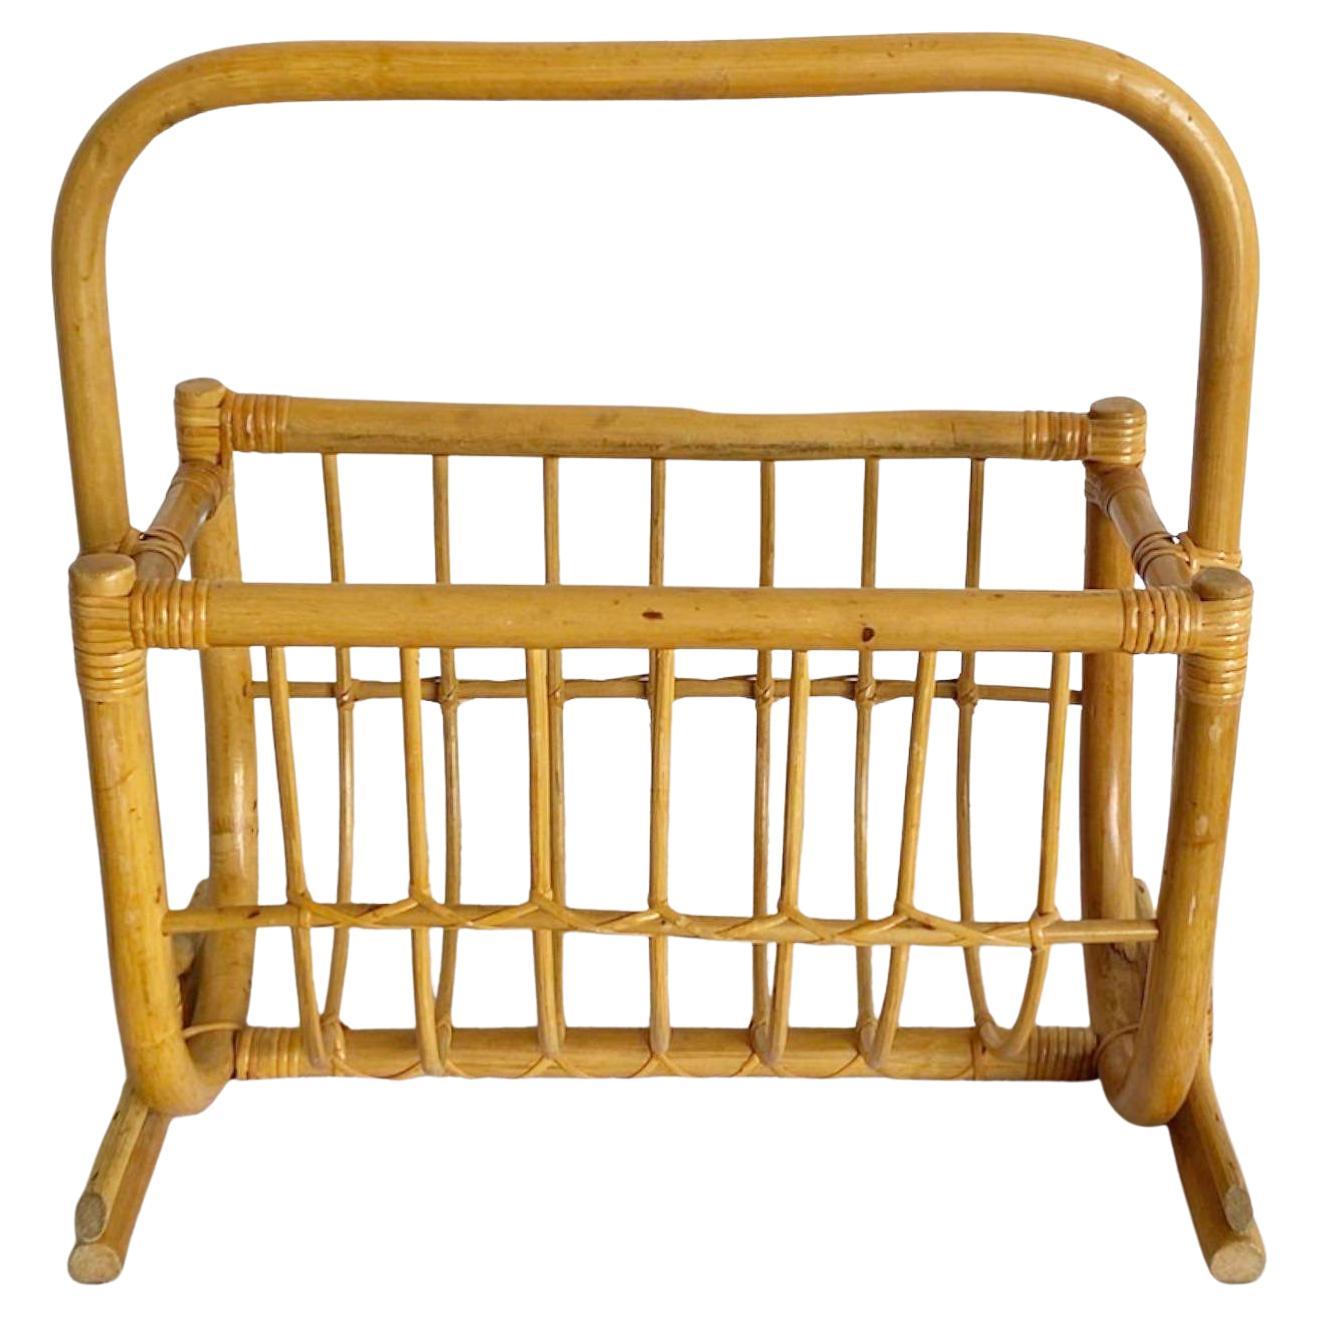 Exceptional vintage bohemian magazine rack. Features a fantastic bamboo and rattan construction.
